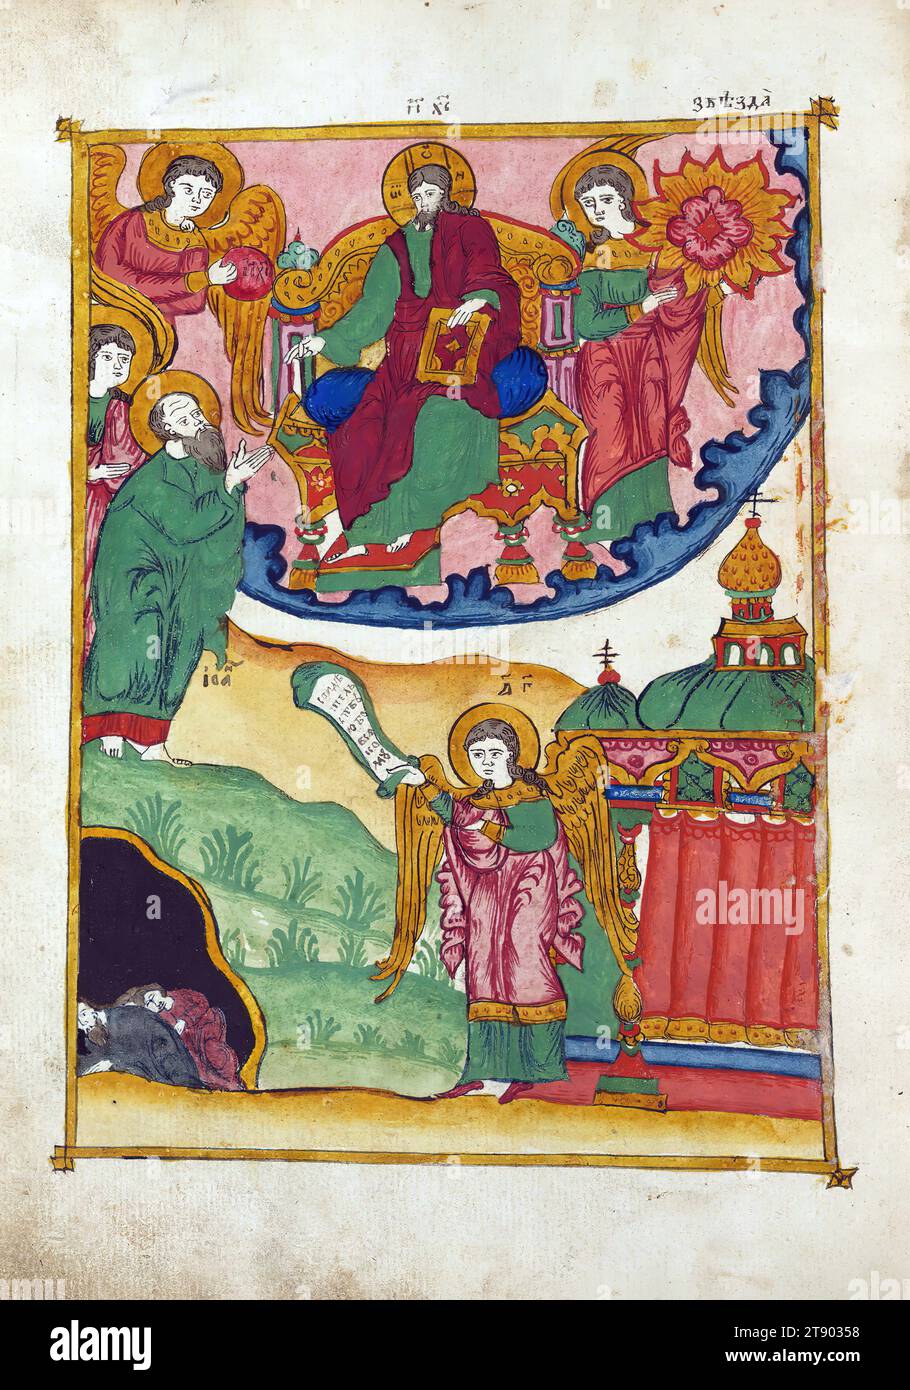 Apocalypse with Patristic commentary, St. John before Christ; Gabriel holds aloft a letter to one of the cities, This manuscript was made around 1800 by the 'Old Believers,' a group of Russian Christians who dissented from the Russian Orthodox Church and were subsequently persecuted and excommunicated. Because their books were often confiscated and they were forbidden to use printing presses, they continued to write important works such as this one by hand Stock Photo